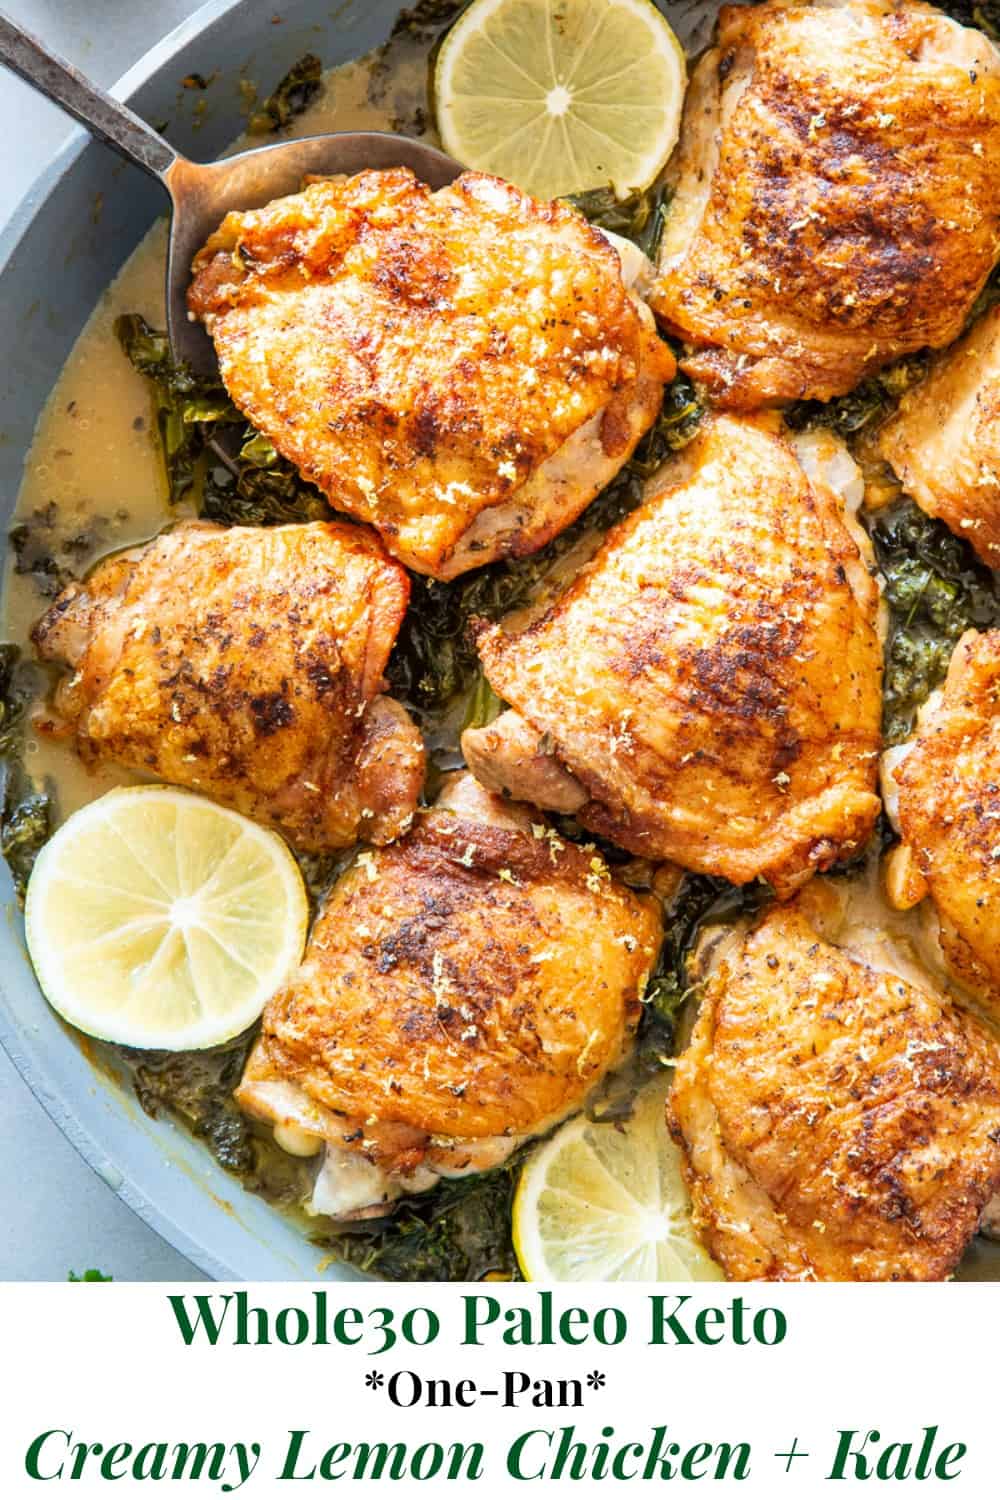 This One Pan Lemon Chicken with Kale is an easy, healthy and delicious meal you'll want on repeat in your house!  Juicy chicken thighs are seasoned, seared, and cooked in a creamy lemon sauce with kale for an extra punch of greens and flavor.  It's Paleo, Whole30 compliant, keto, and low FODMAP too. #cleaneating #lowfodmap #paleo #whole30 #keto